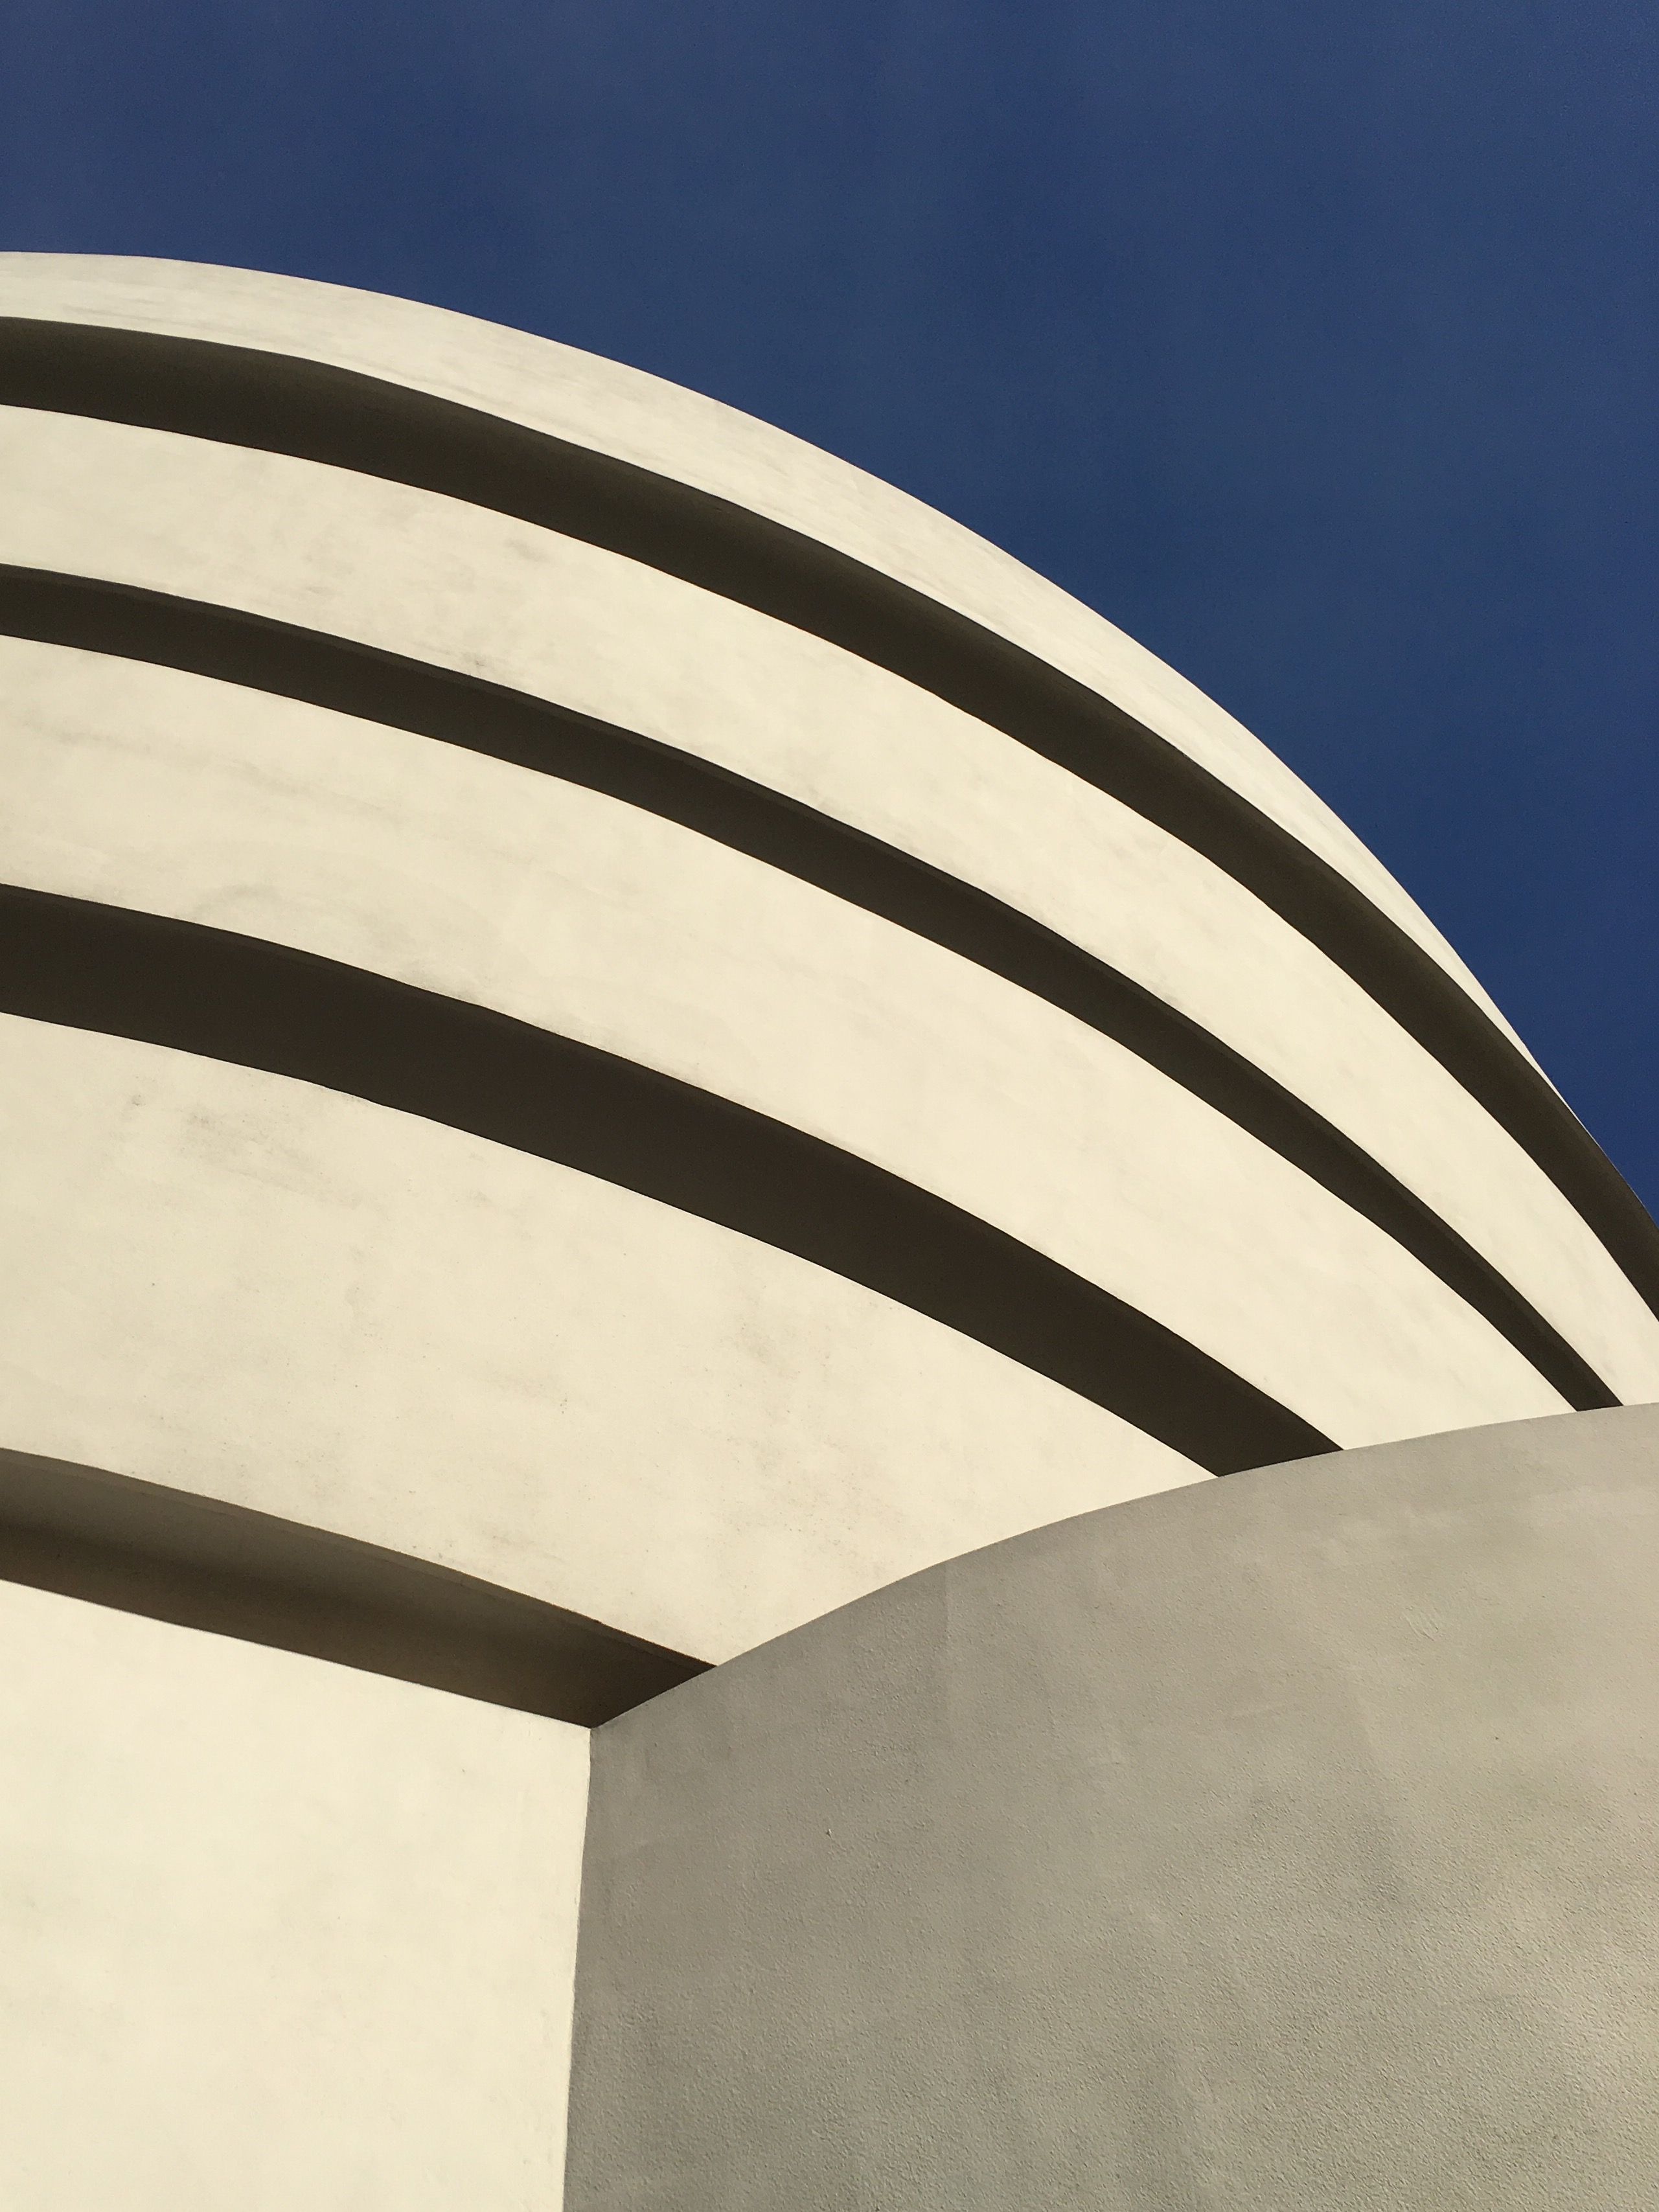 Caption: A close-up photo of the architectural lines on the Guggenheim Museum, located in New York, NY. (Local Guides Christina-NYC)